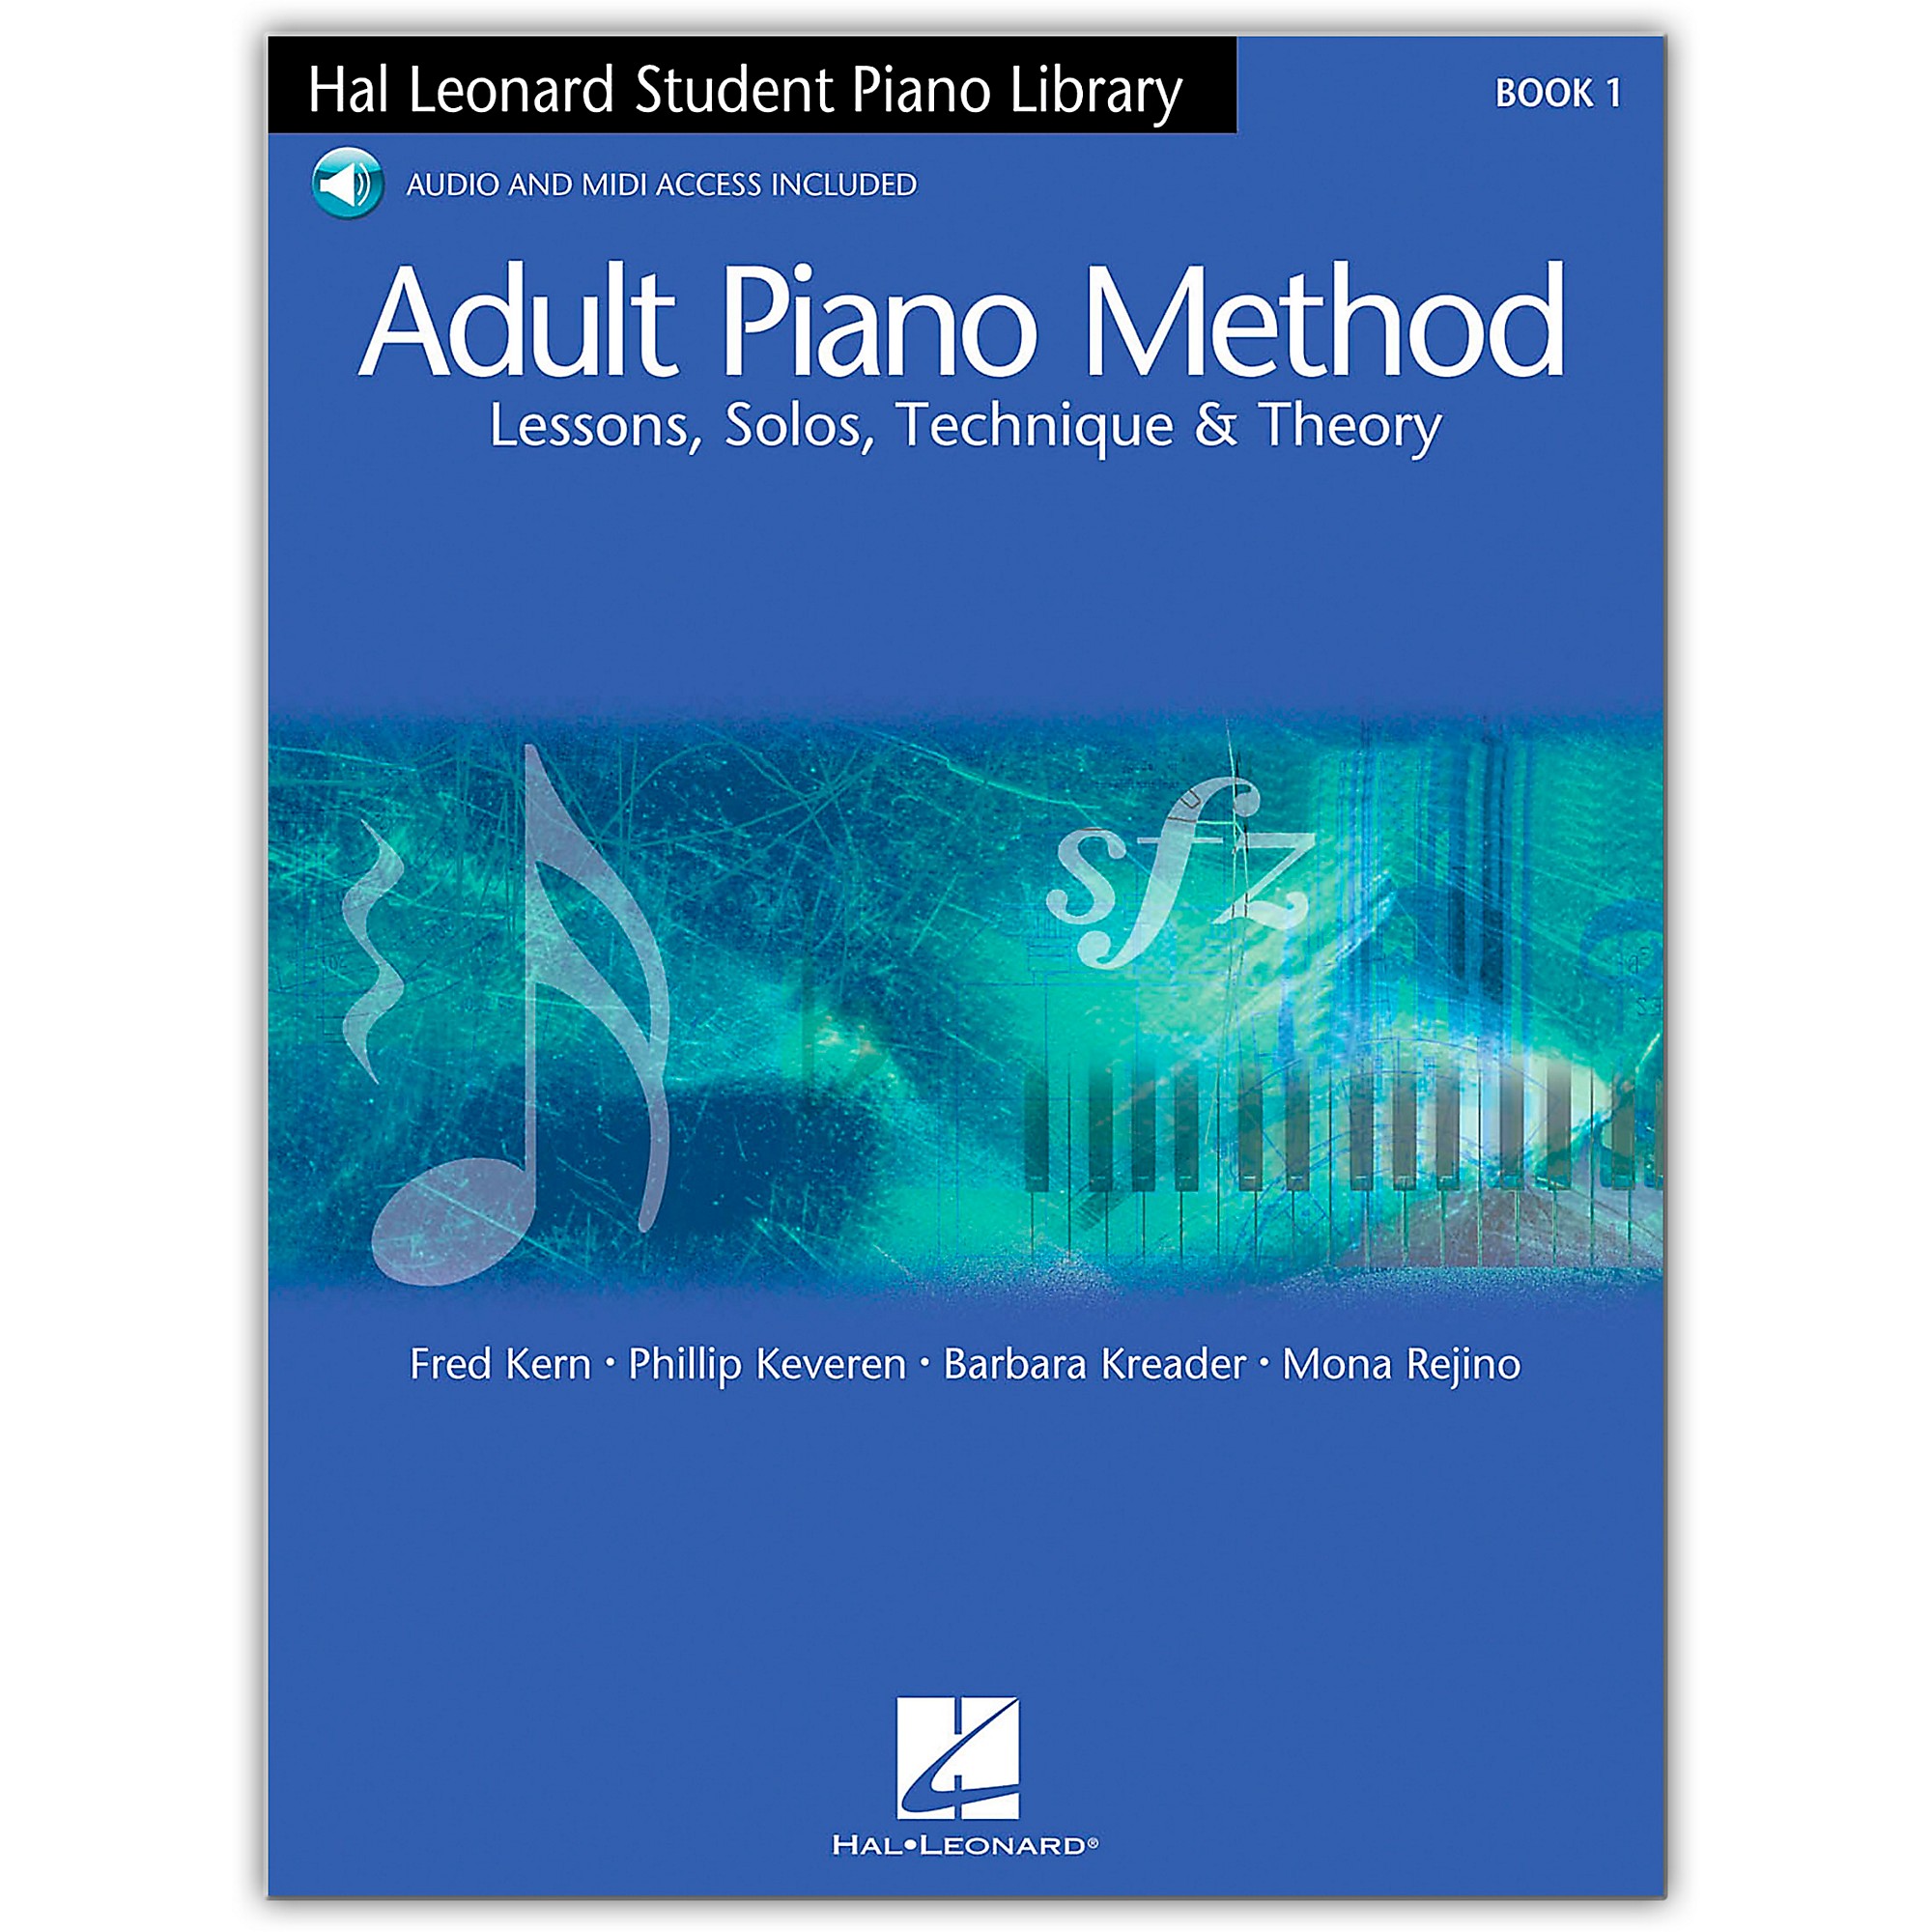 Method book. Hal Leonard my Library sign in.